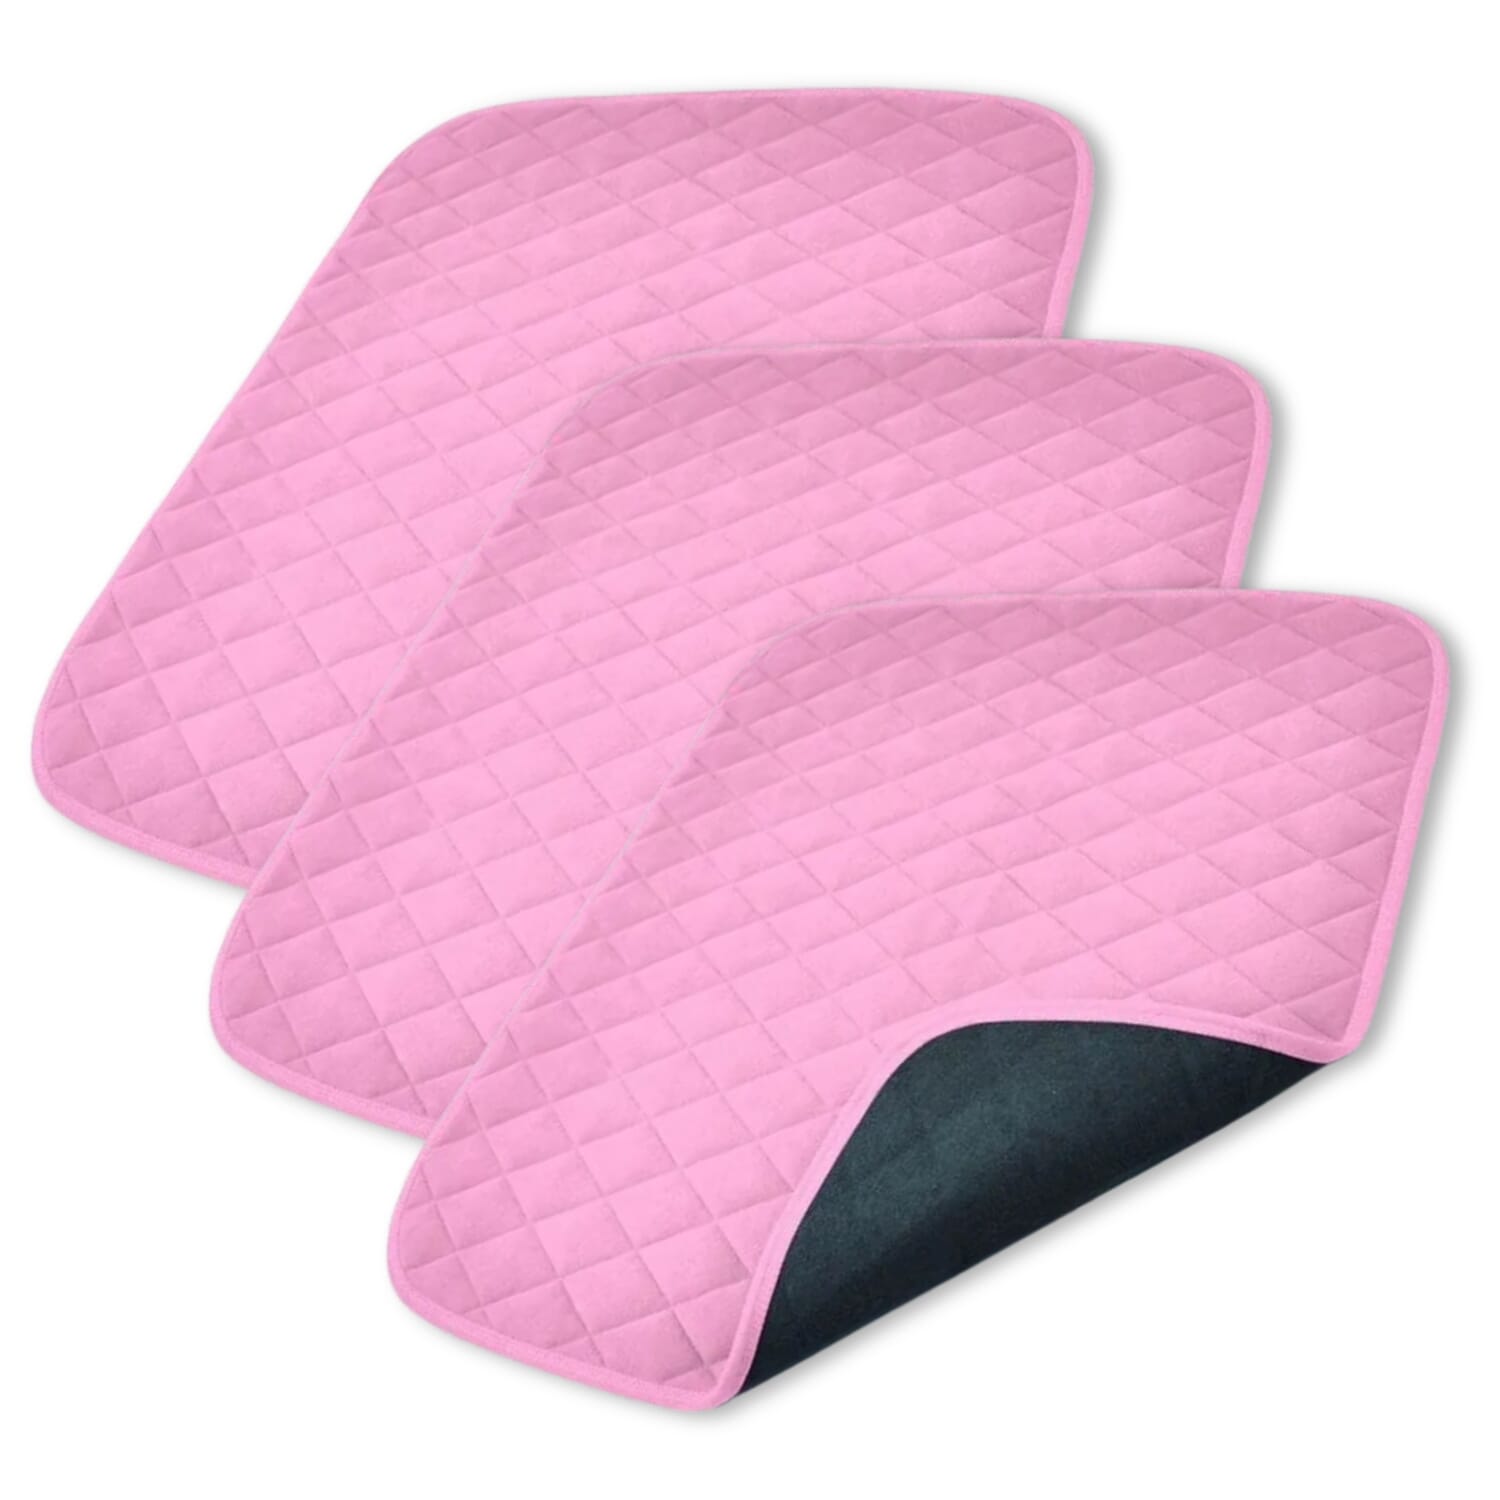 View Vida Washable Chair Pad Pink Pack of 3 information